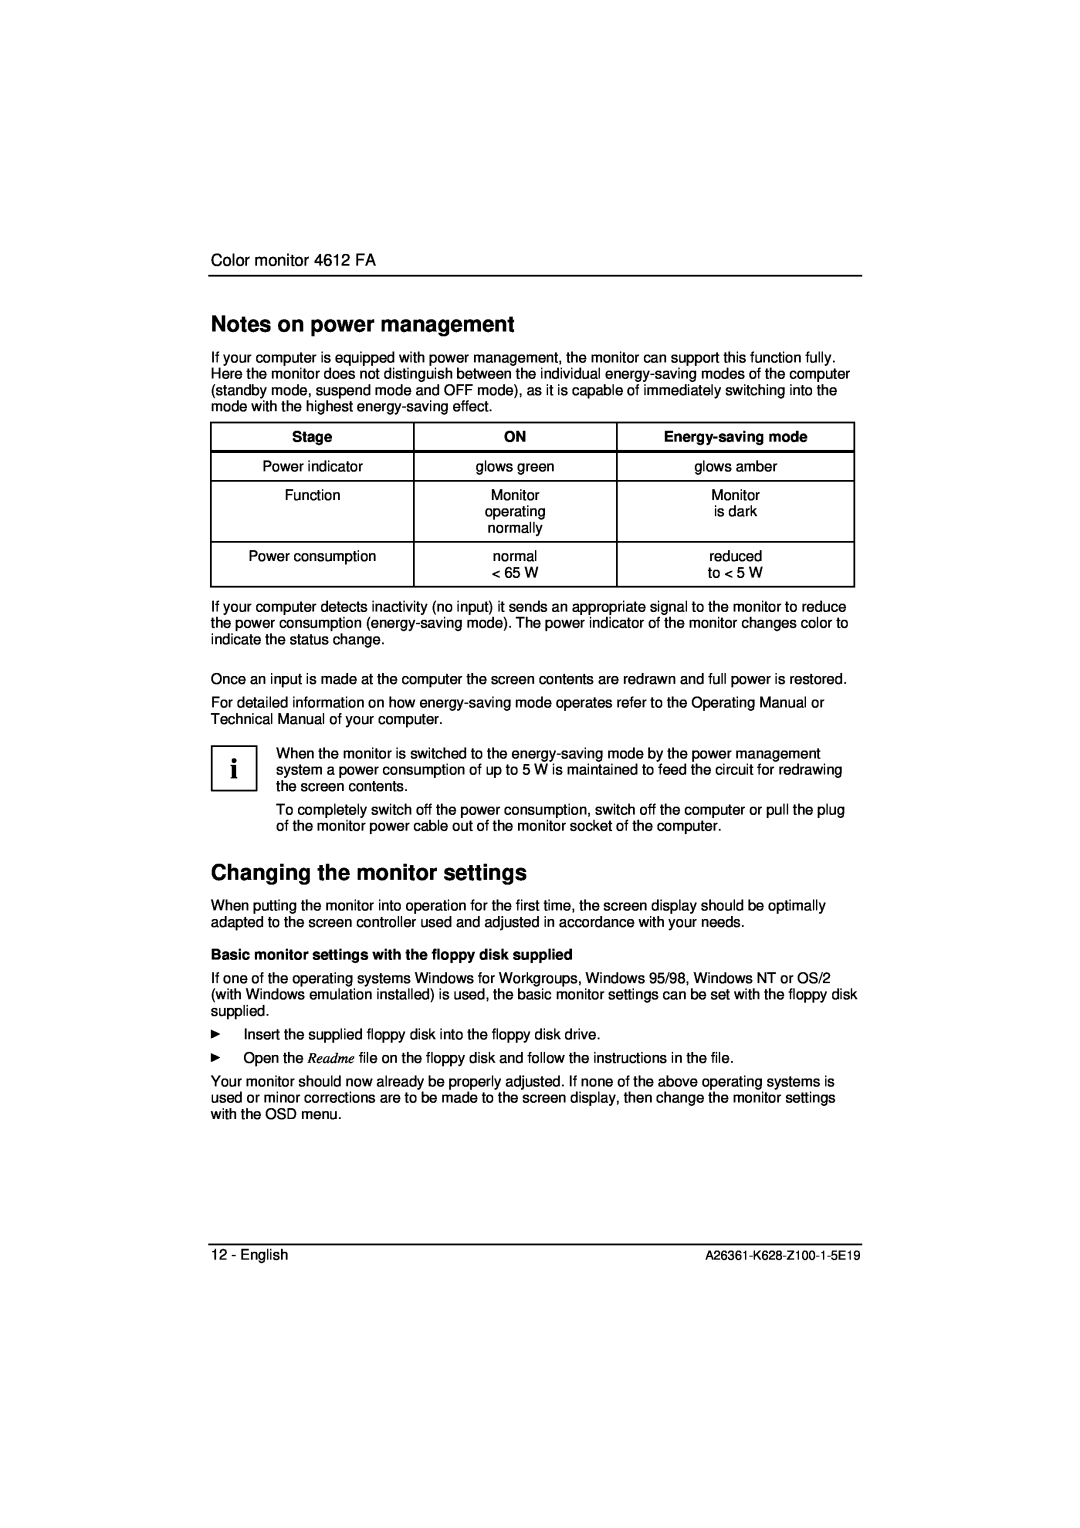 Fujitsu Siemens Computers manual Notes on power management, Changing the monitor settings, Color monitor 4612 FA, Stage 